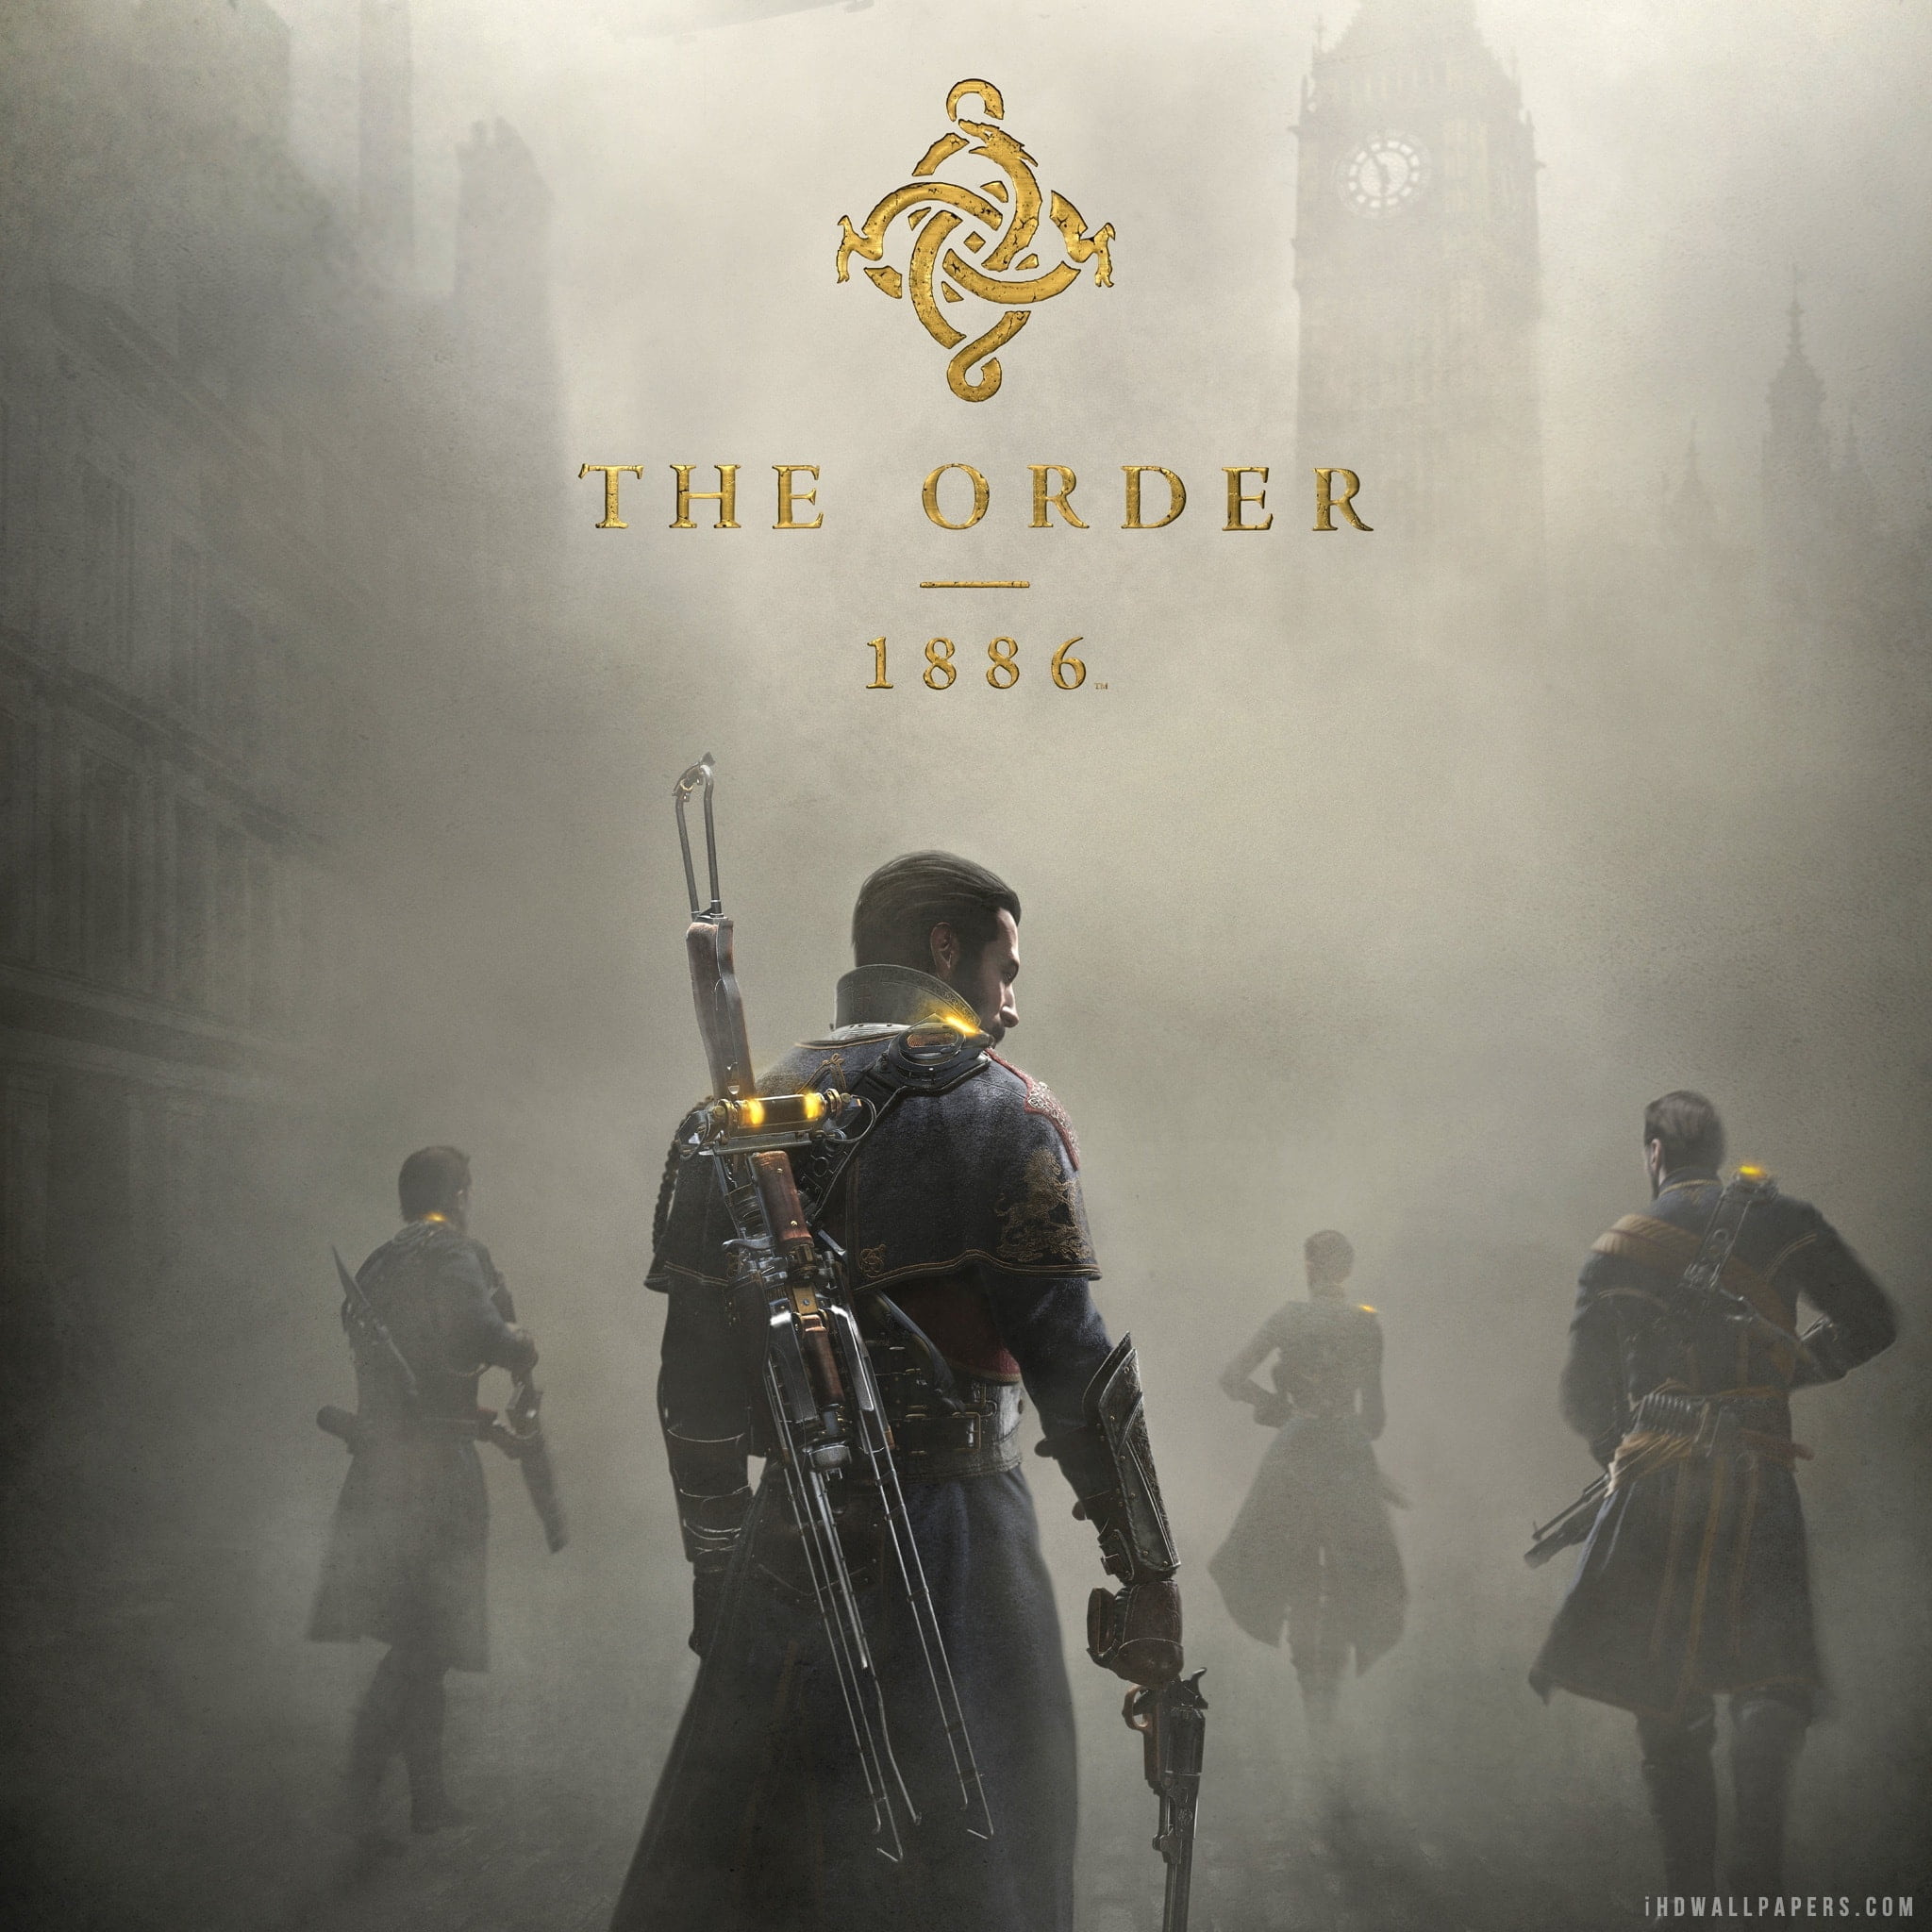 Ps4 1886. The order: 1886. Ps4 орден: 1886 (the order: 1886). Order 1886 ps4. Галахад орден 1886.